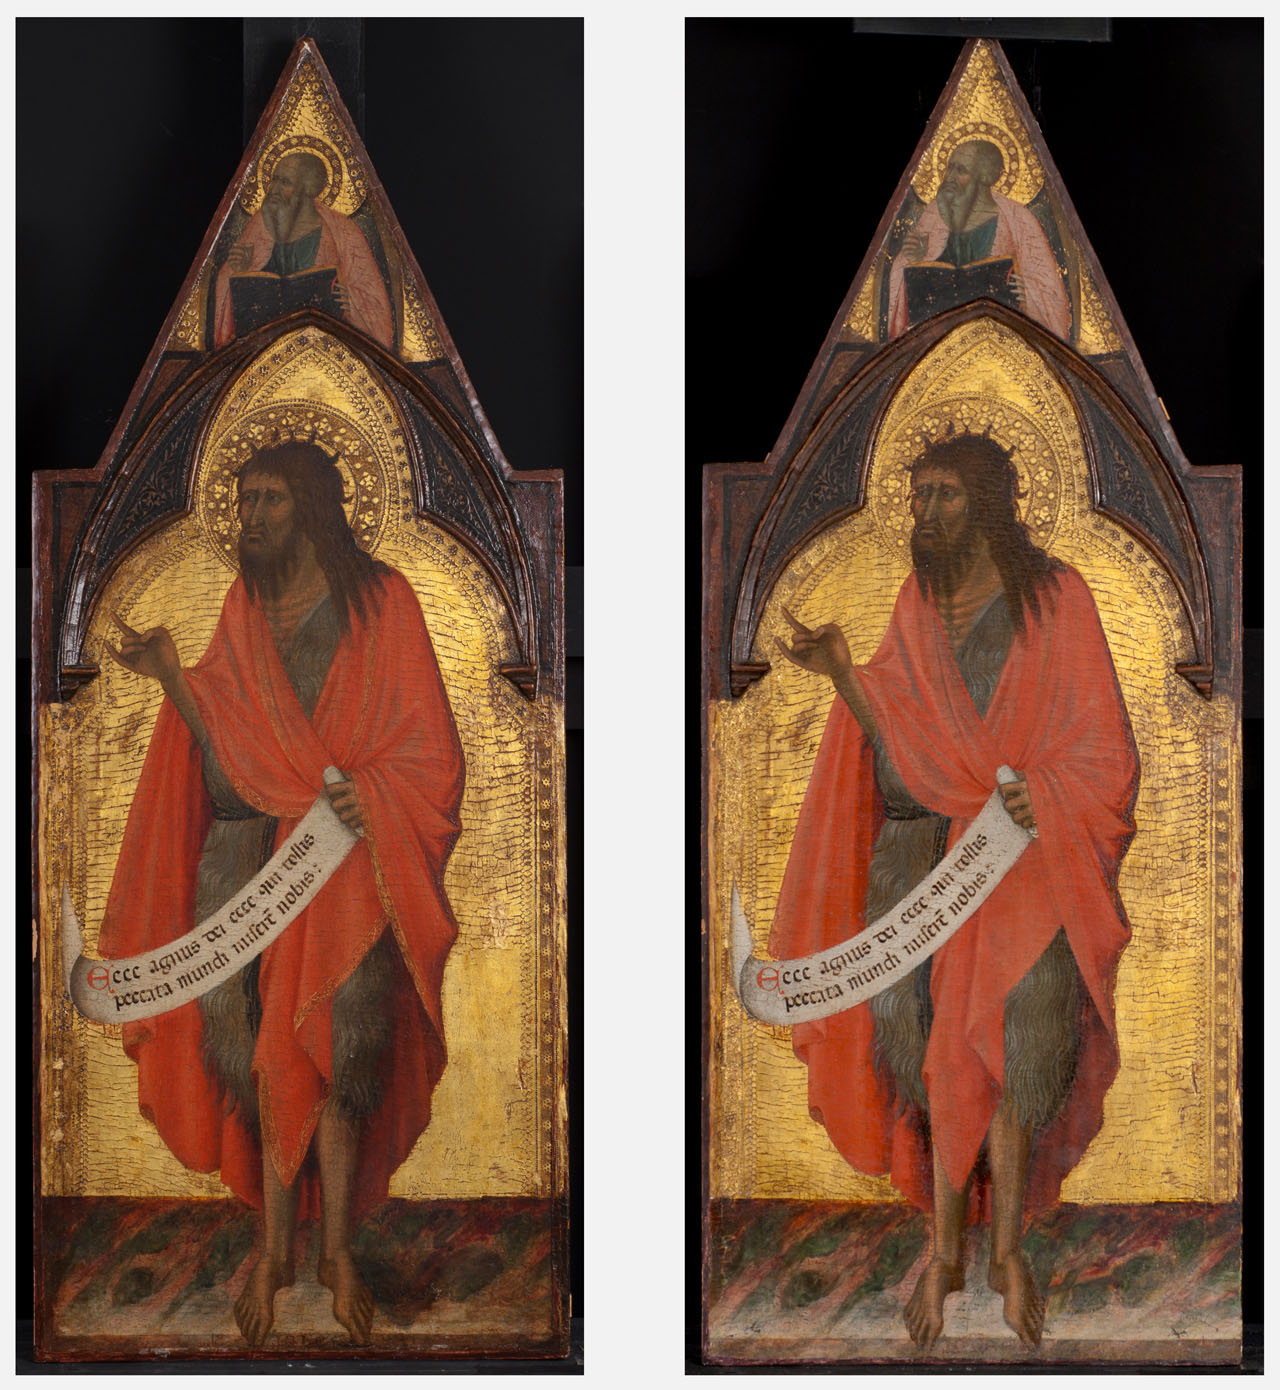 Left: Saint John the Baptist, follower of Pietro Lorenzetti, possibly Tegliacci, dated to before 1362, K1237, before treatment. Right: Saint John the Baptist, after treatment